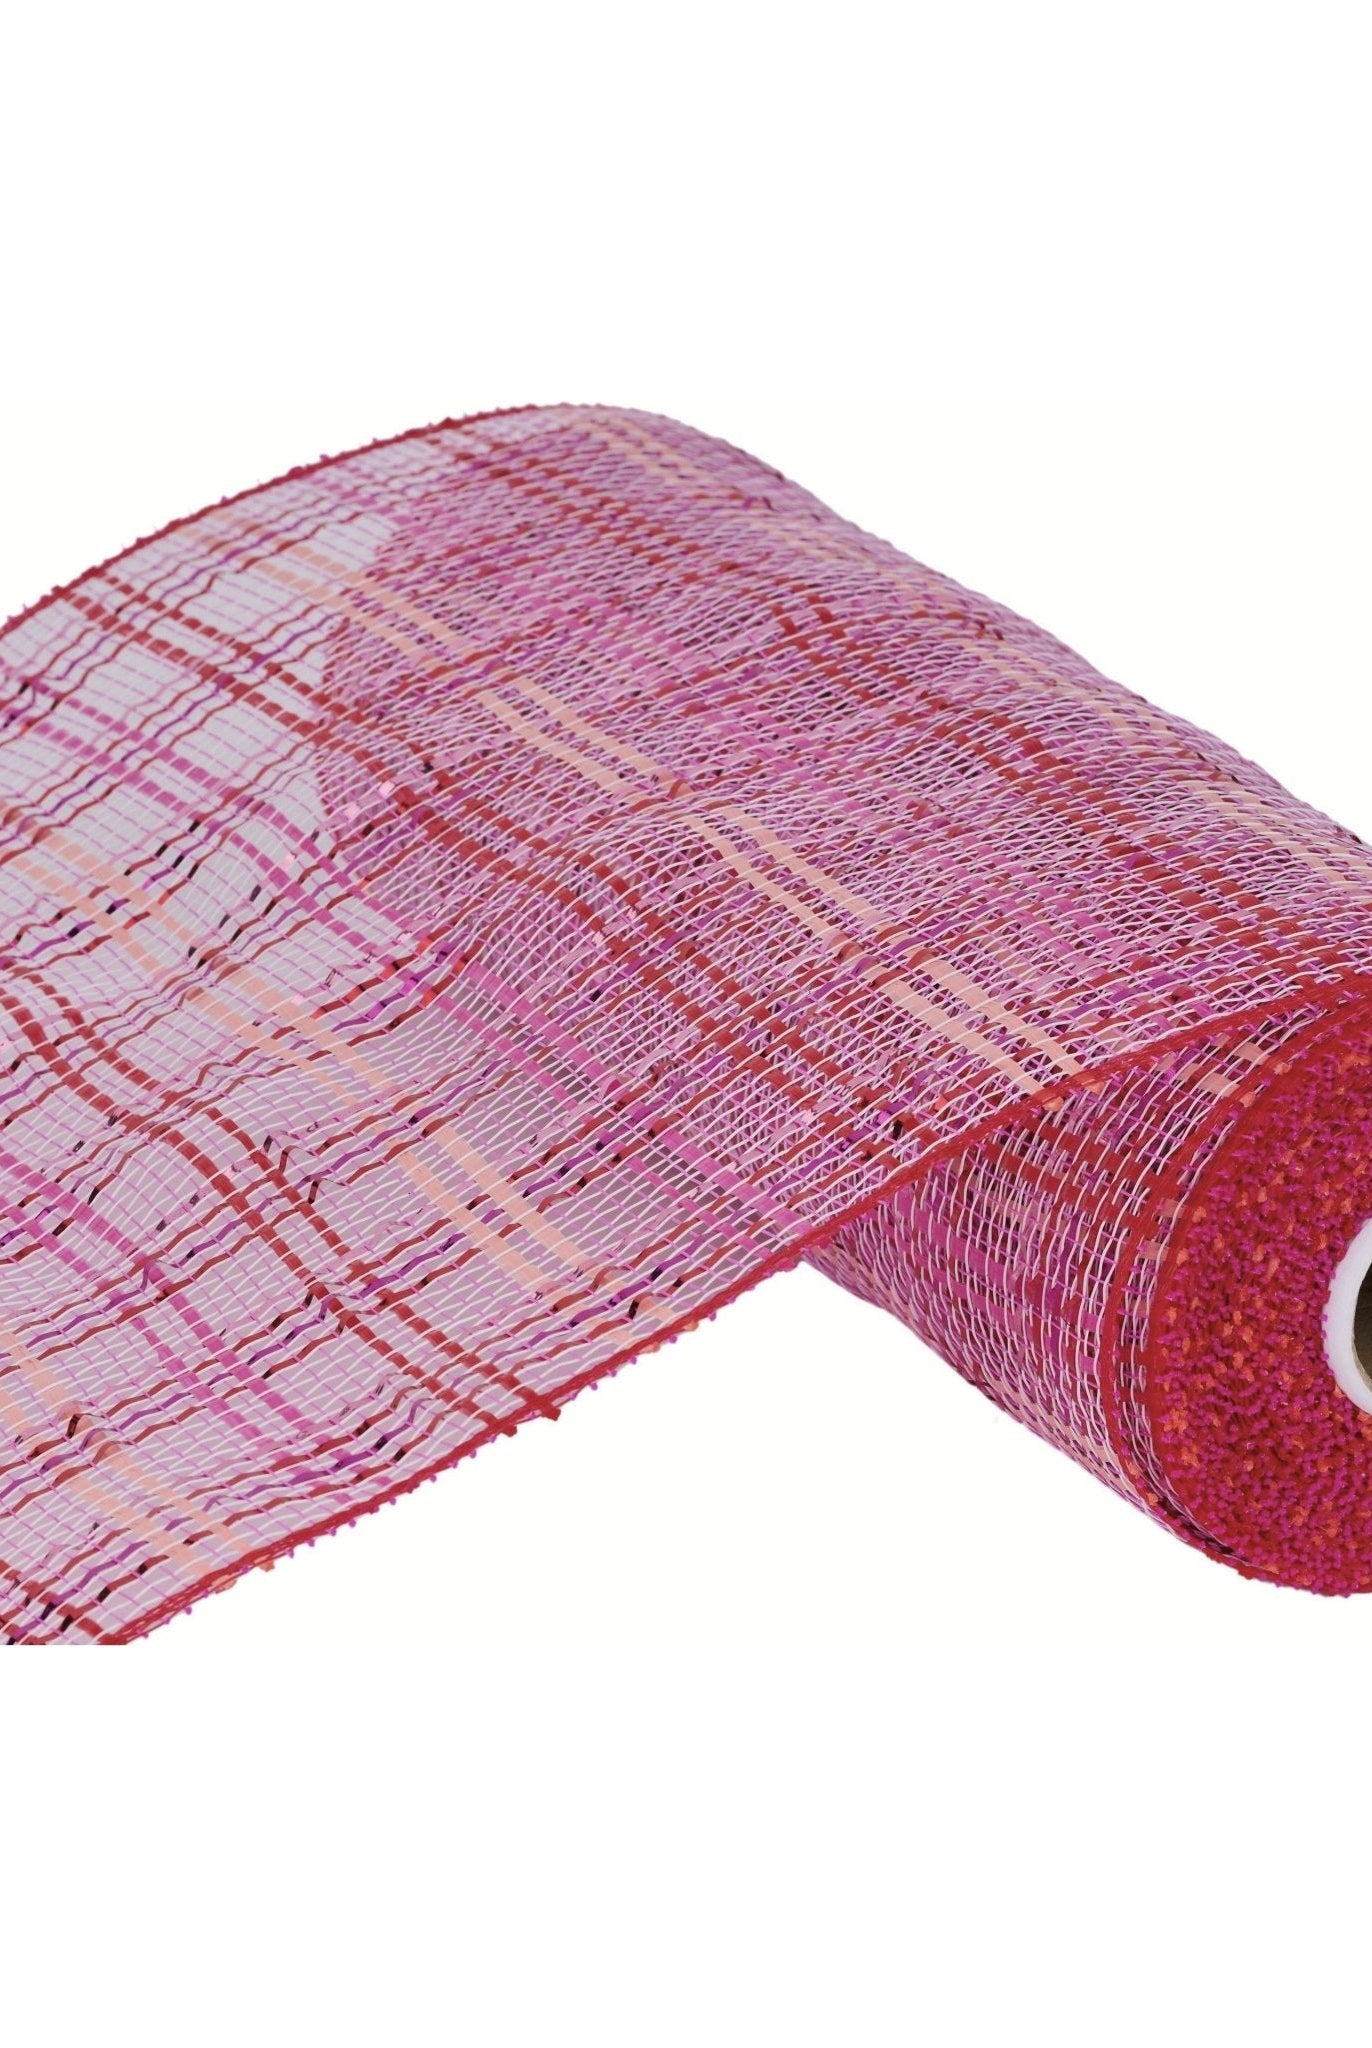 10" Vertical Foil Plaid Mesh: Pink and Red (10 Yards) - Michelle's aDOORable Creations - Poly Deco Mesh